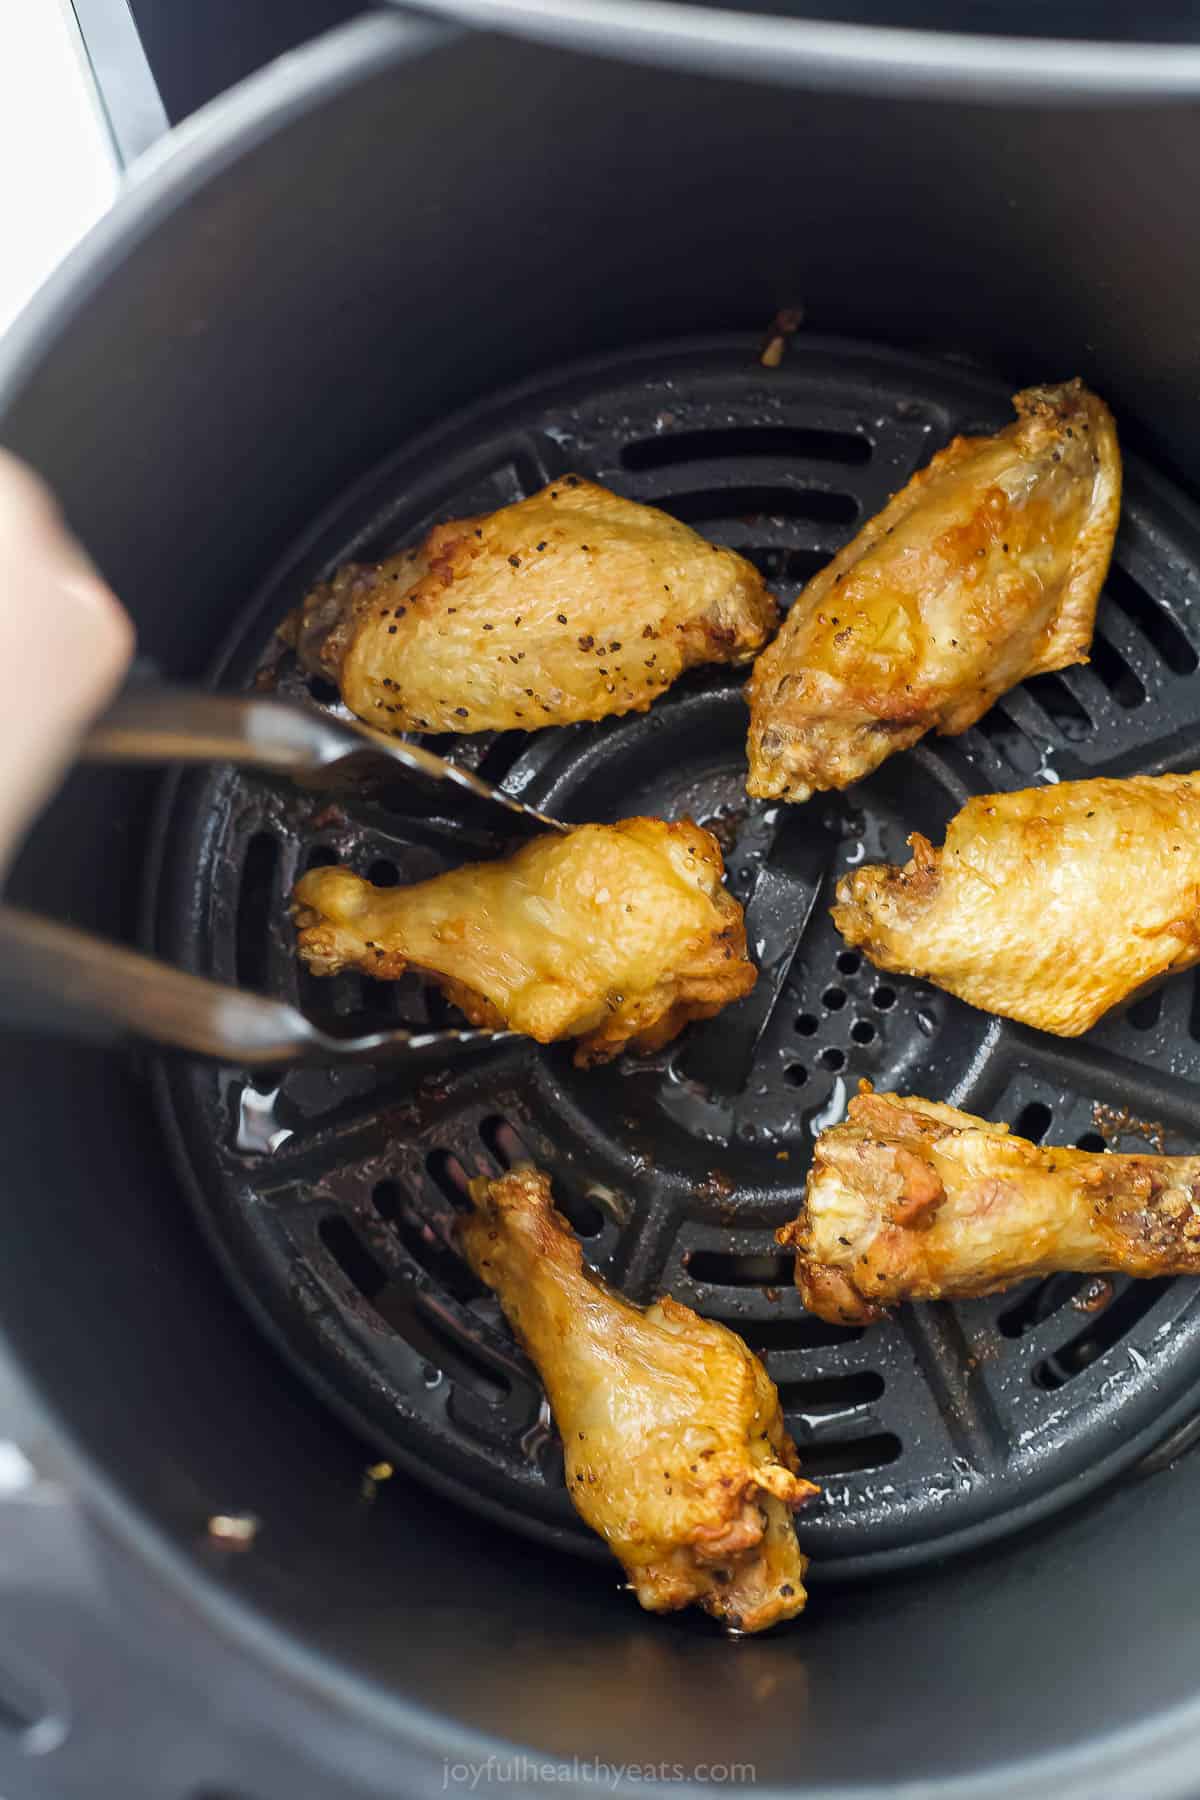 Partially cooked wings in an Air Fryer basket being flipped with a pair of metal tongs